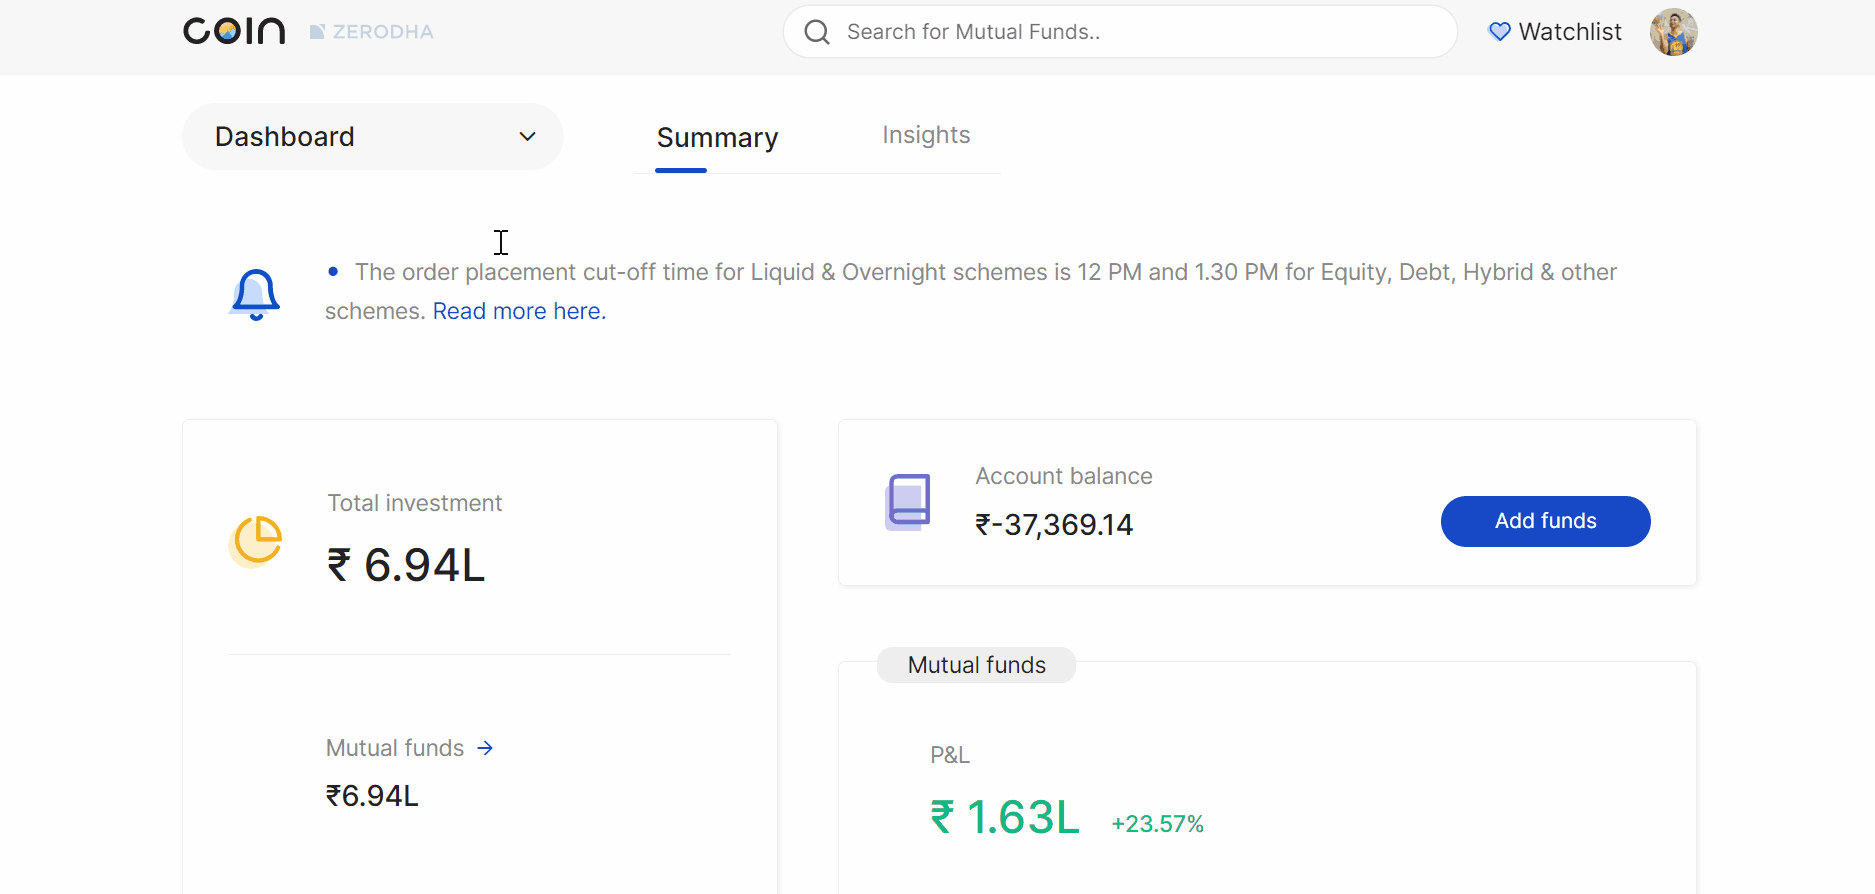 How to sell mutual funds in Zerodha Coin?